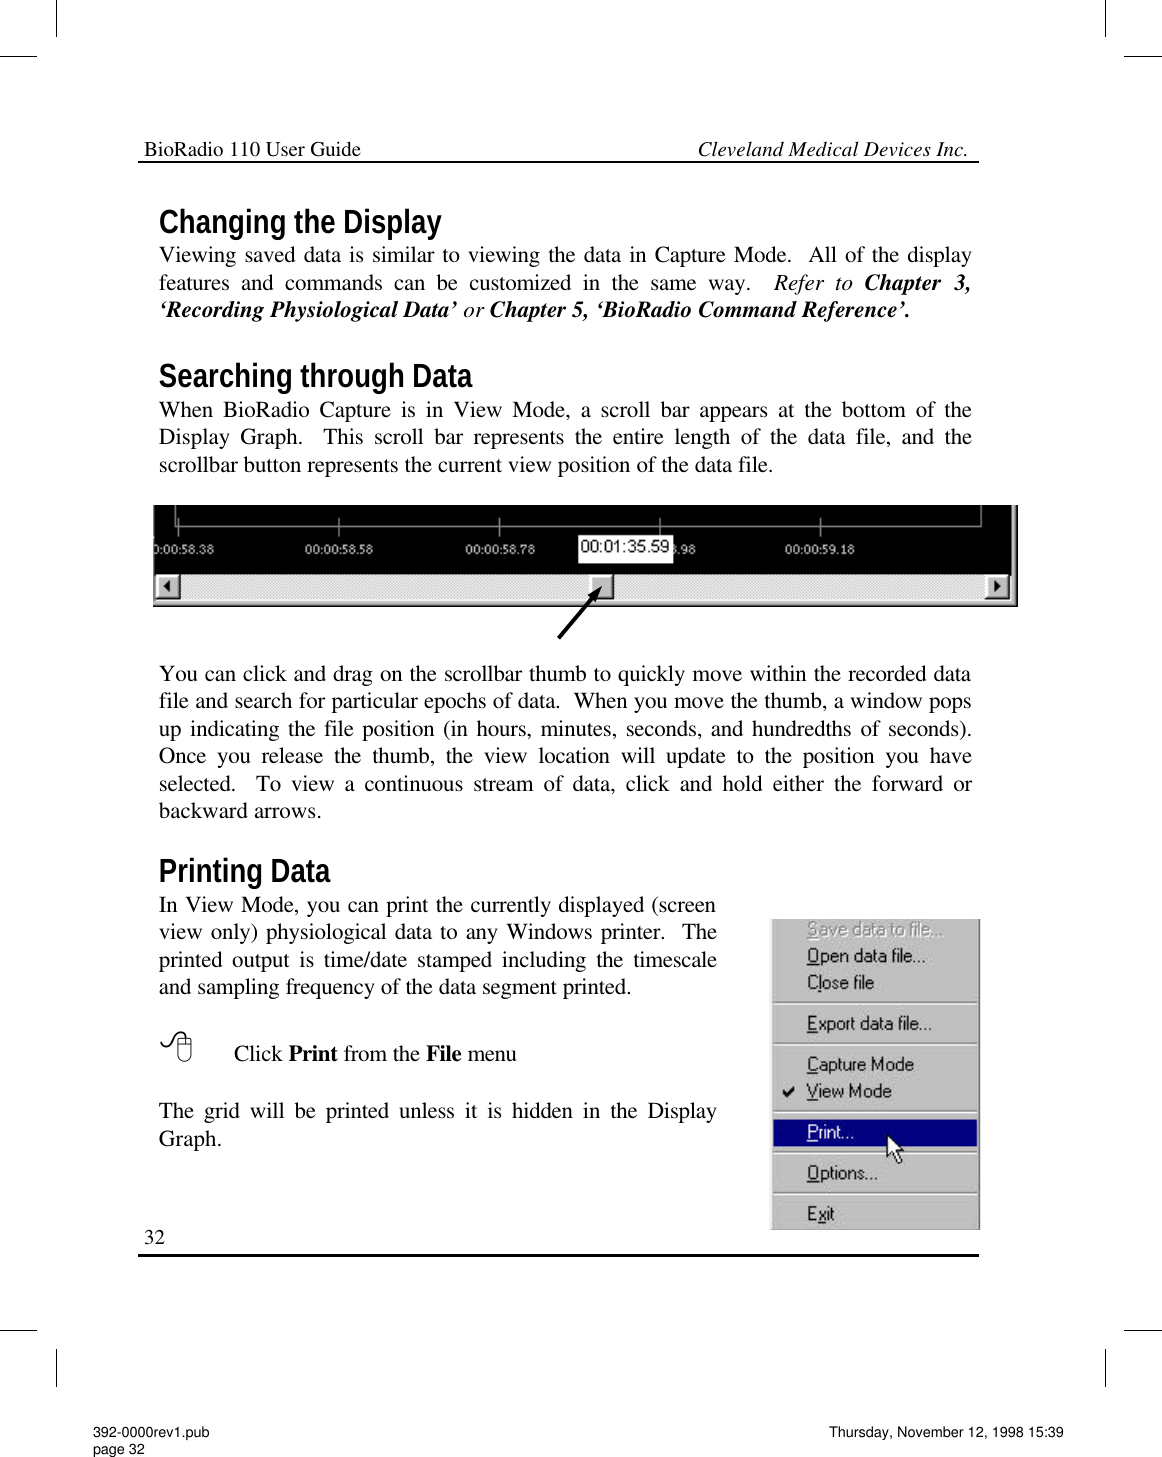 BioRadio 110 User Guide                                                             Cleveland Medical Devices Inc.32 Changing the Display Viewing saved data is similar to viewing the data in Capture Mode.  All of the display features and commands can be customized in the same way.  Refer to Chapter 3, ‘Recording Physiological Data’ or Chapter 5, ‘BioRadio Command Reference’.   Searching through Data When BioRadio Capture is in View Mode, a scroll bar appears at the bottom of the Display Graph.  This scroll bar represents the entire length of the data file, and the scrollbar button represents the current view position of the data file.  You can click and drag on the scrollbar thumb to quickly move within the recorded data file and search for particular epochs of data.  When you move the thumb, a window pops up indicating the file position (in hours, minutes, seconds, and hundredths of seconds).  Once you release the thumb, the view location will update to the position you have selected.  To view a continuous stream of data, click and hold either the forward or backward arrows.  Printing Data In View Mode, you can print the currently displayed (screen view only) physiological data to any Windows printer.  The printed output is time/date stamped including the timescale and sampling frequency of the data segment printed.  8 Click Print from the File menu   The grid will be printed unless it is hidden in the Display Graph. 392-0000rev1.pub page 32 Thursday, November 12, 1998 15:39 